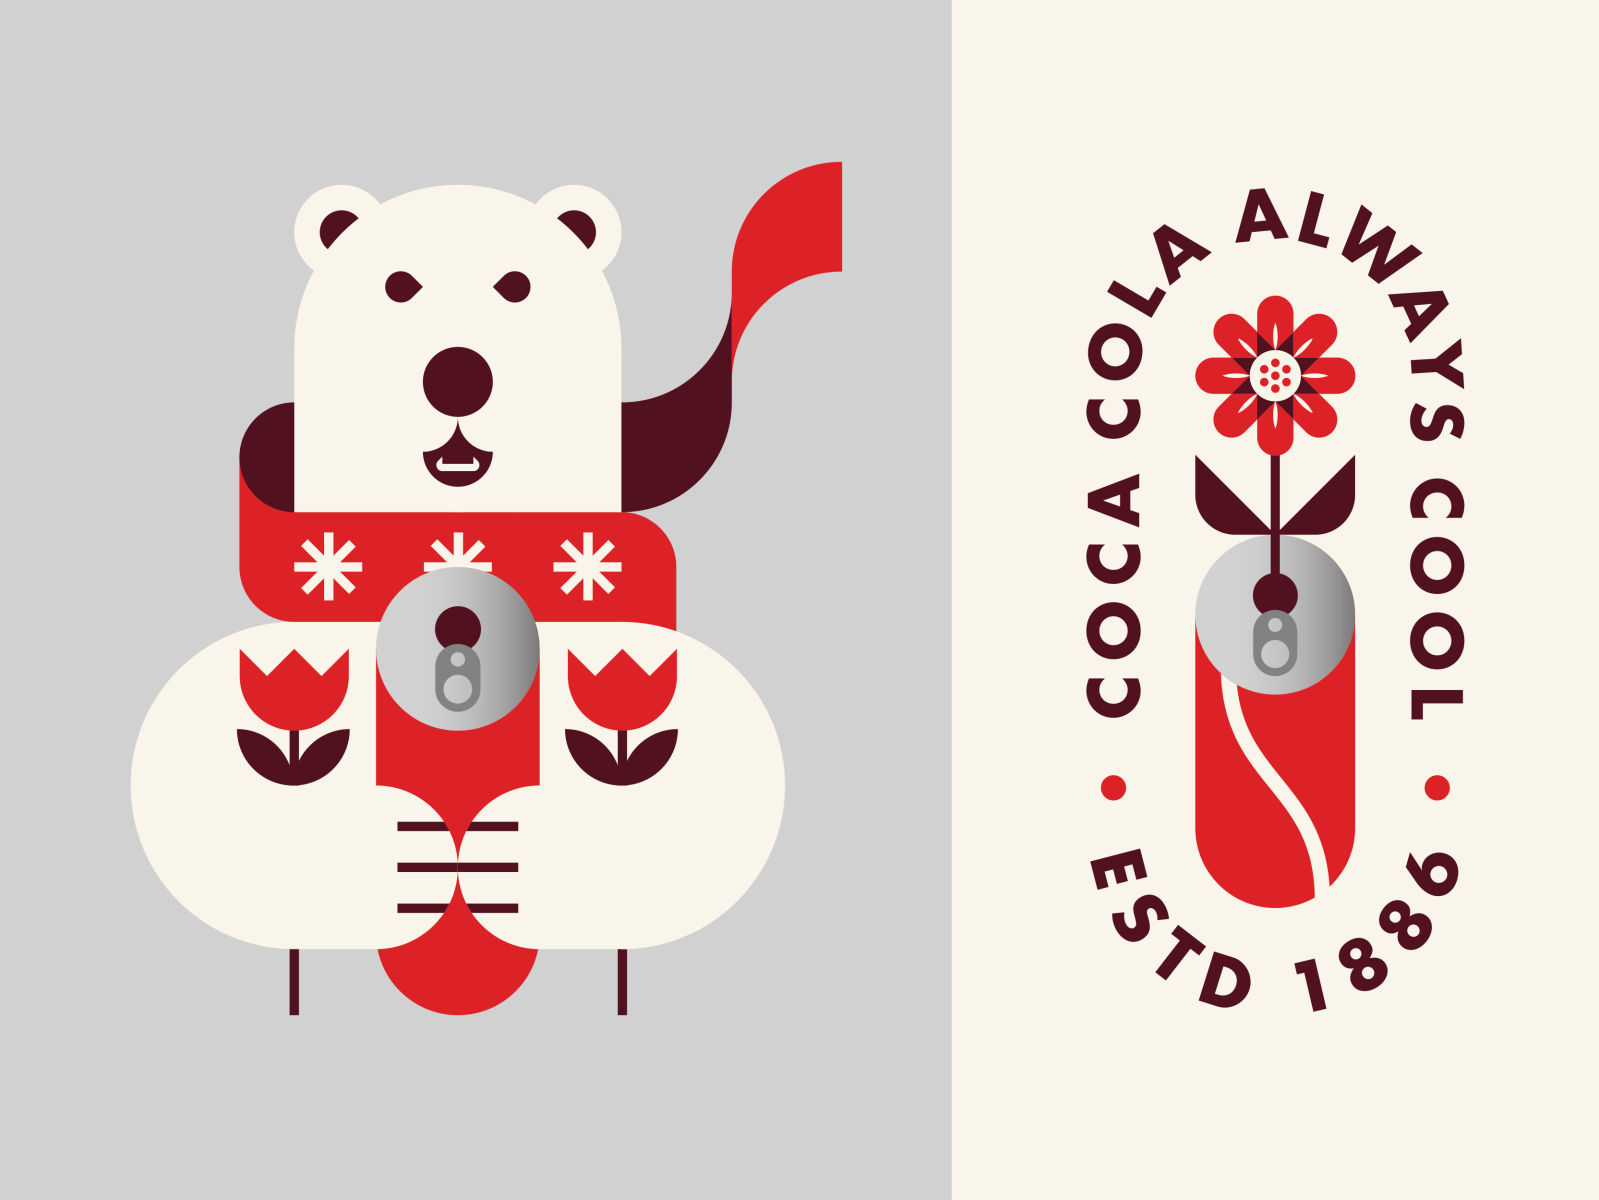 Polar Bear Holding Coca Cola and Flowers by Patrick Moriarty on Dribbble